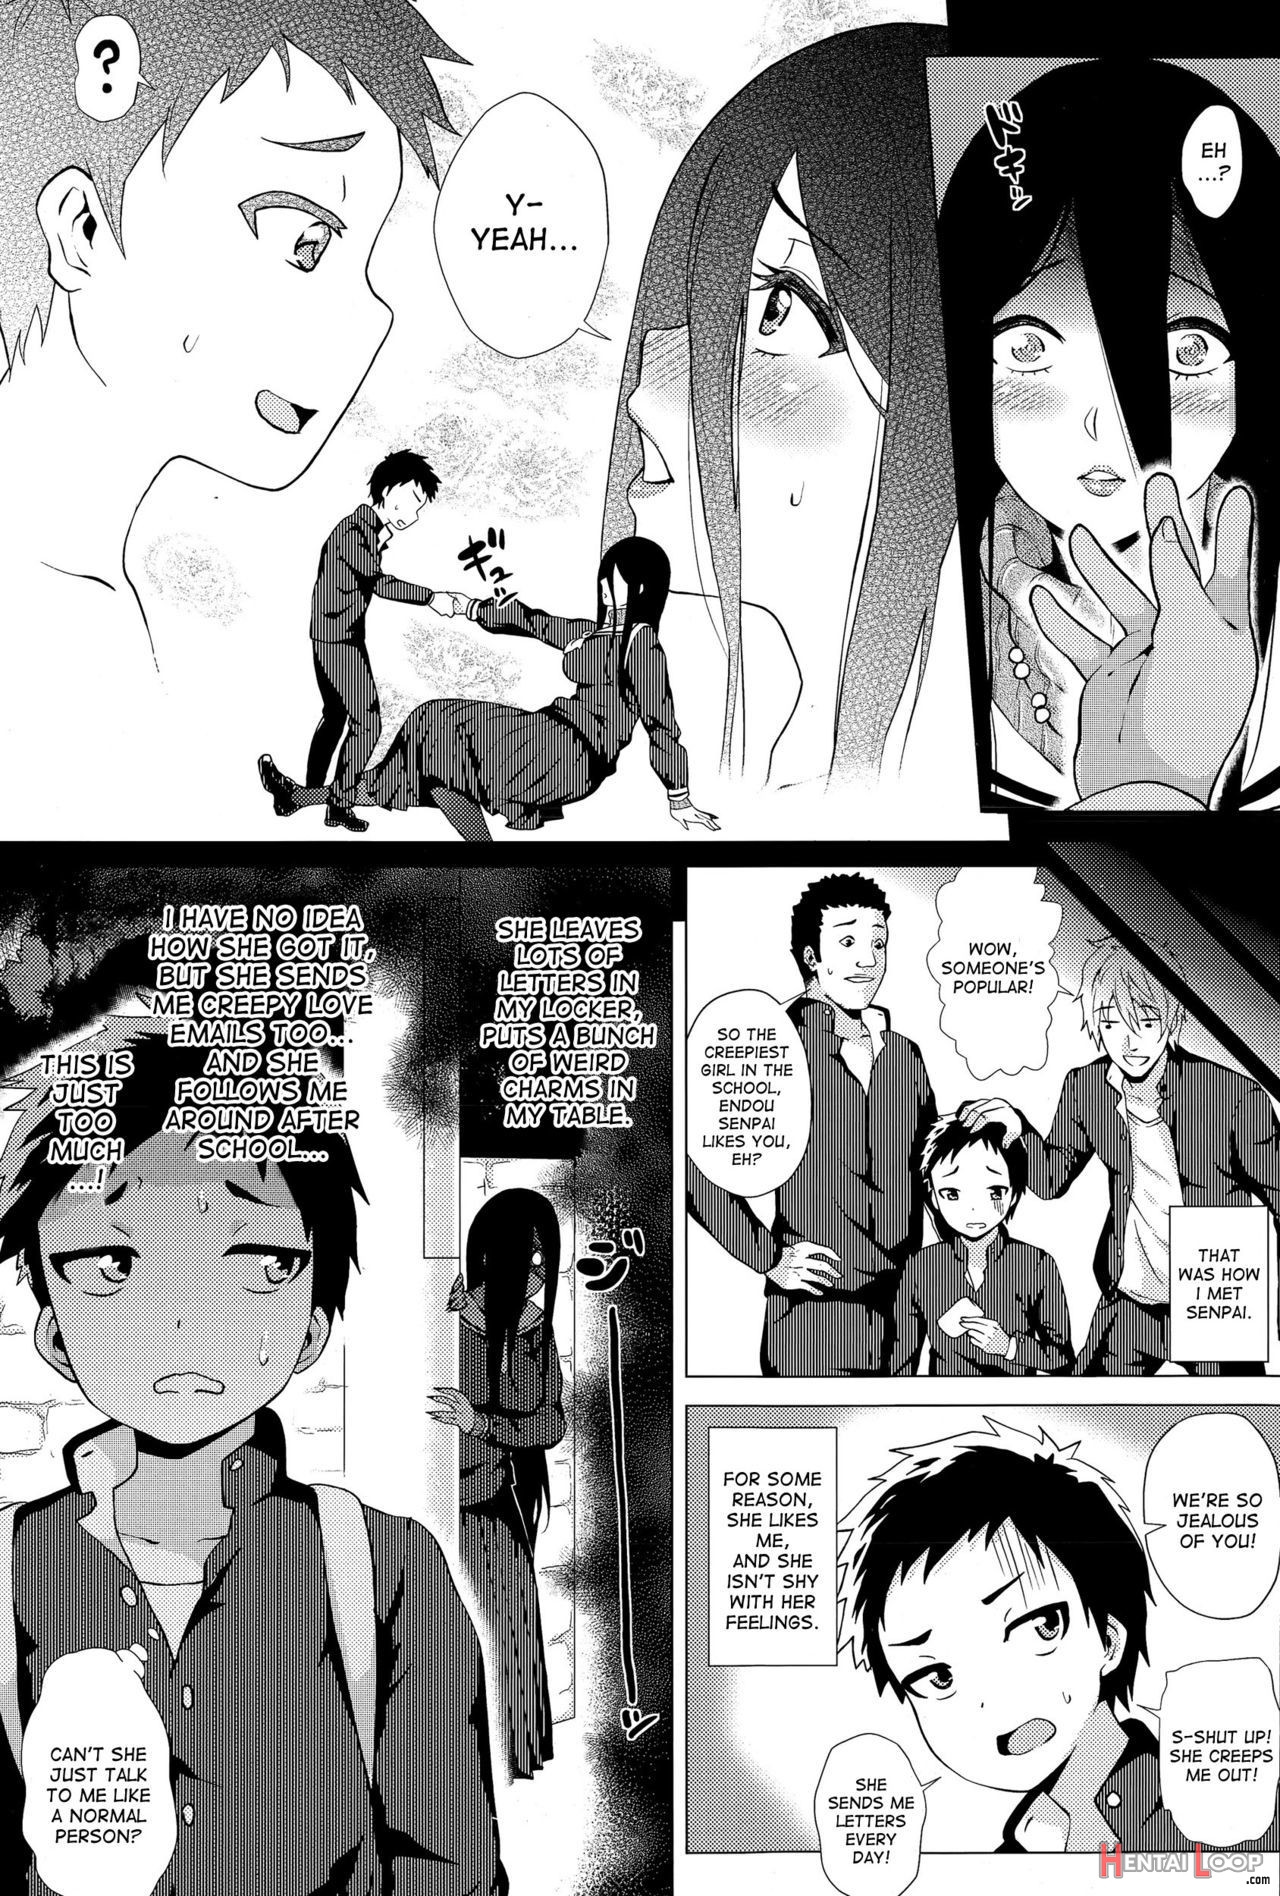 Stalking Girl Ch. 1-3 page 3